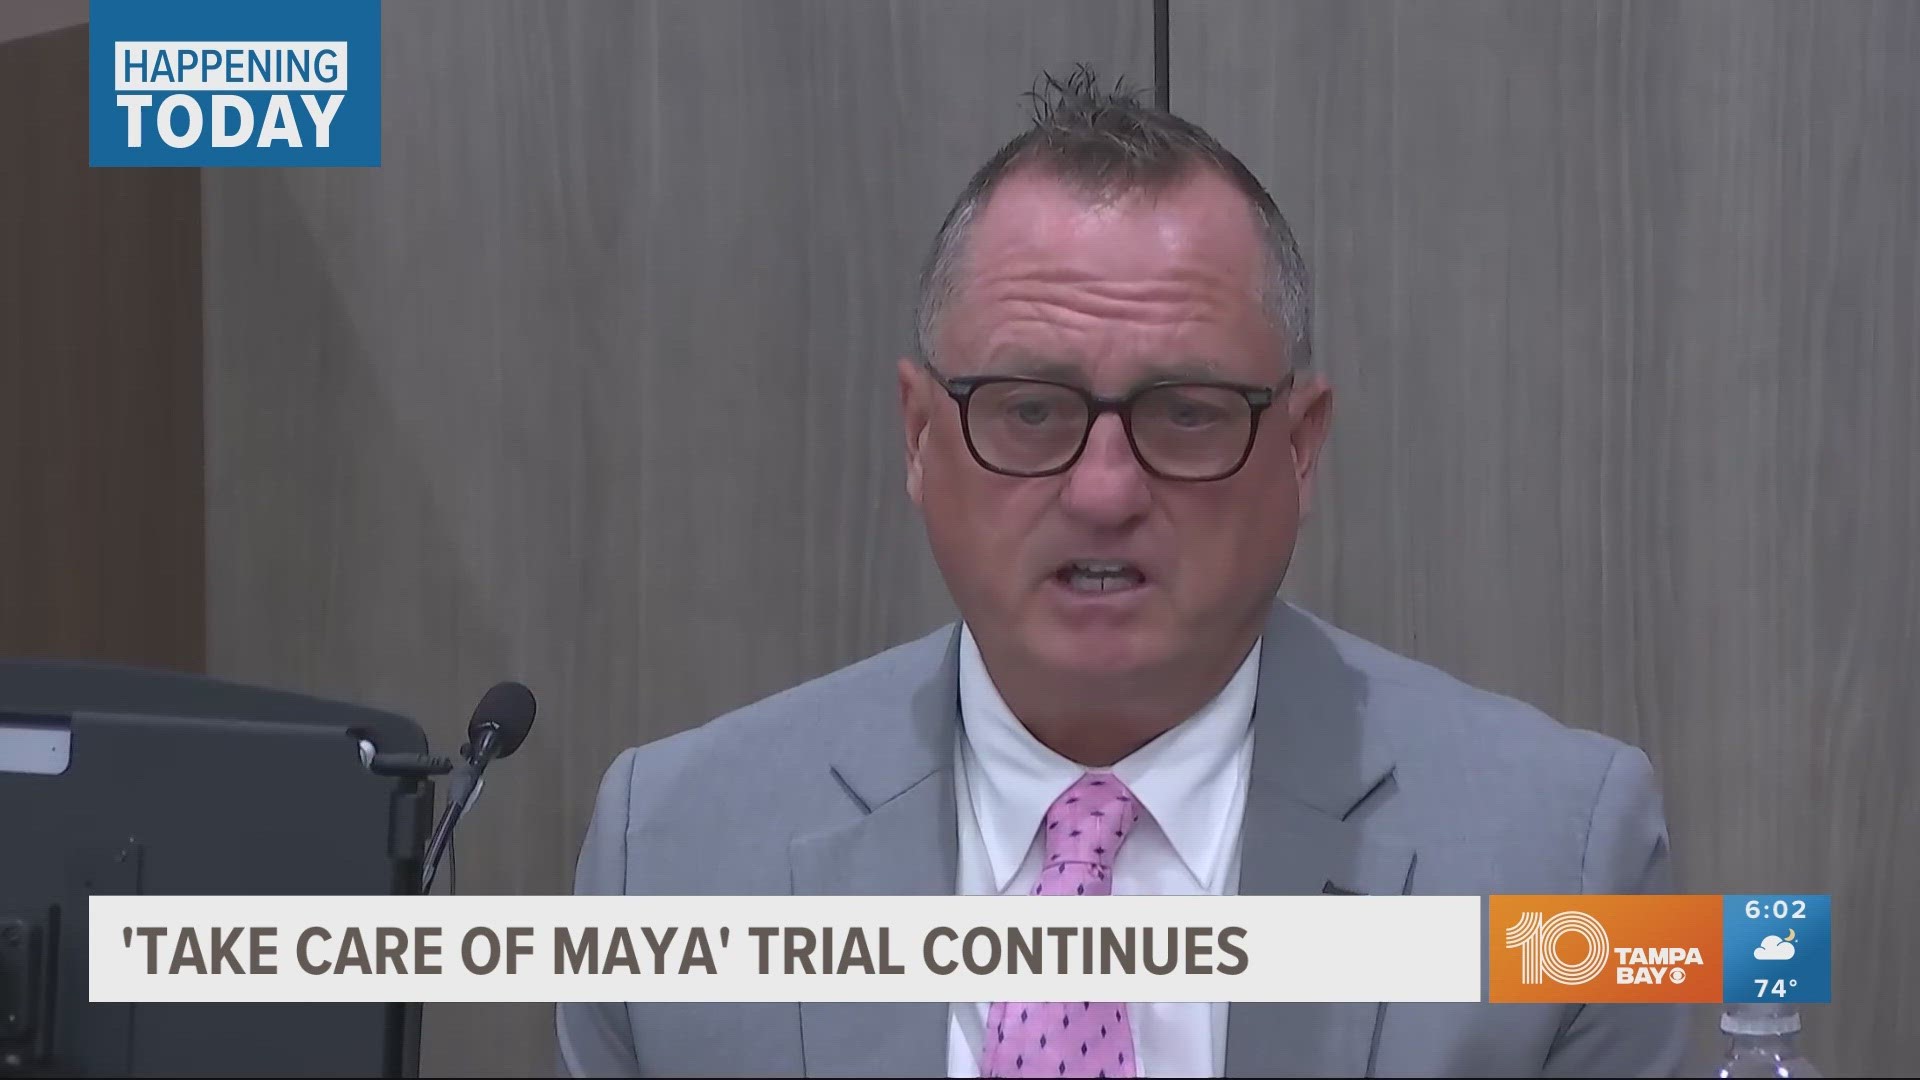 On Monday, Maya's father spoke in court for the first time.